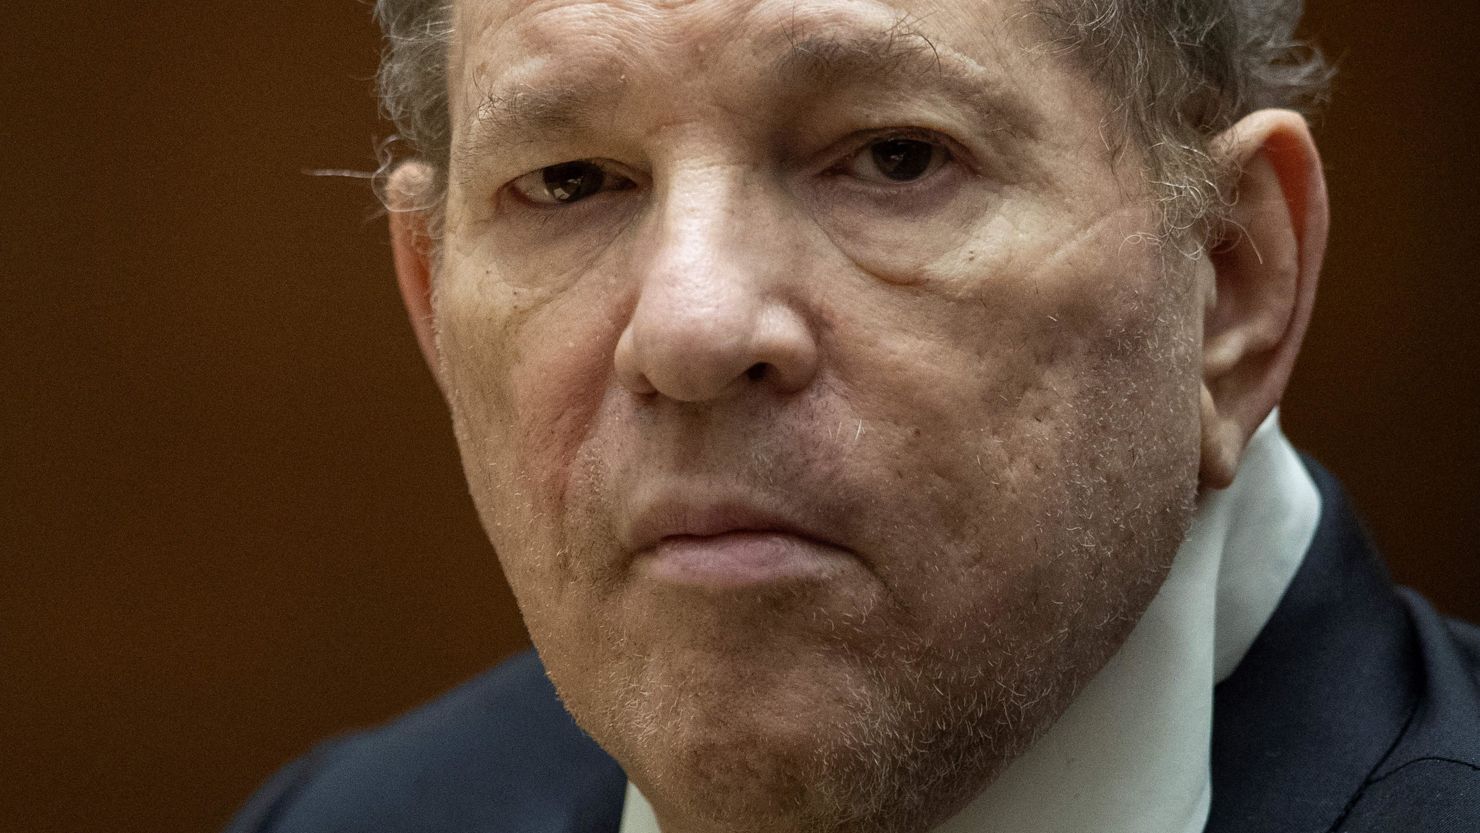 TOPSHOT - Former film producer Harvey Weinstein appears in court at the Clara Shortridge Foltz Criminal Justice Center in Los Angeles, California, on 04 October 2022. - Weinstein was extradited from New York to Los Angeles to face sex-related charges. (Photo by ETIENNE LAURENT / POOL / AFP) (Photo by ETIENNE LAURENT/POOL/AFP via Getty Images)